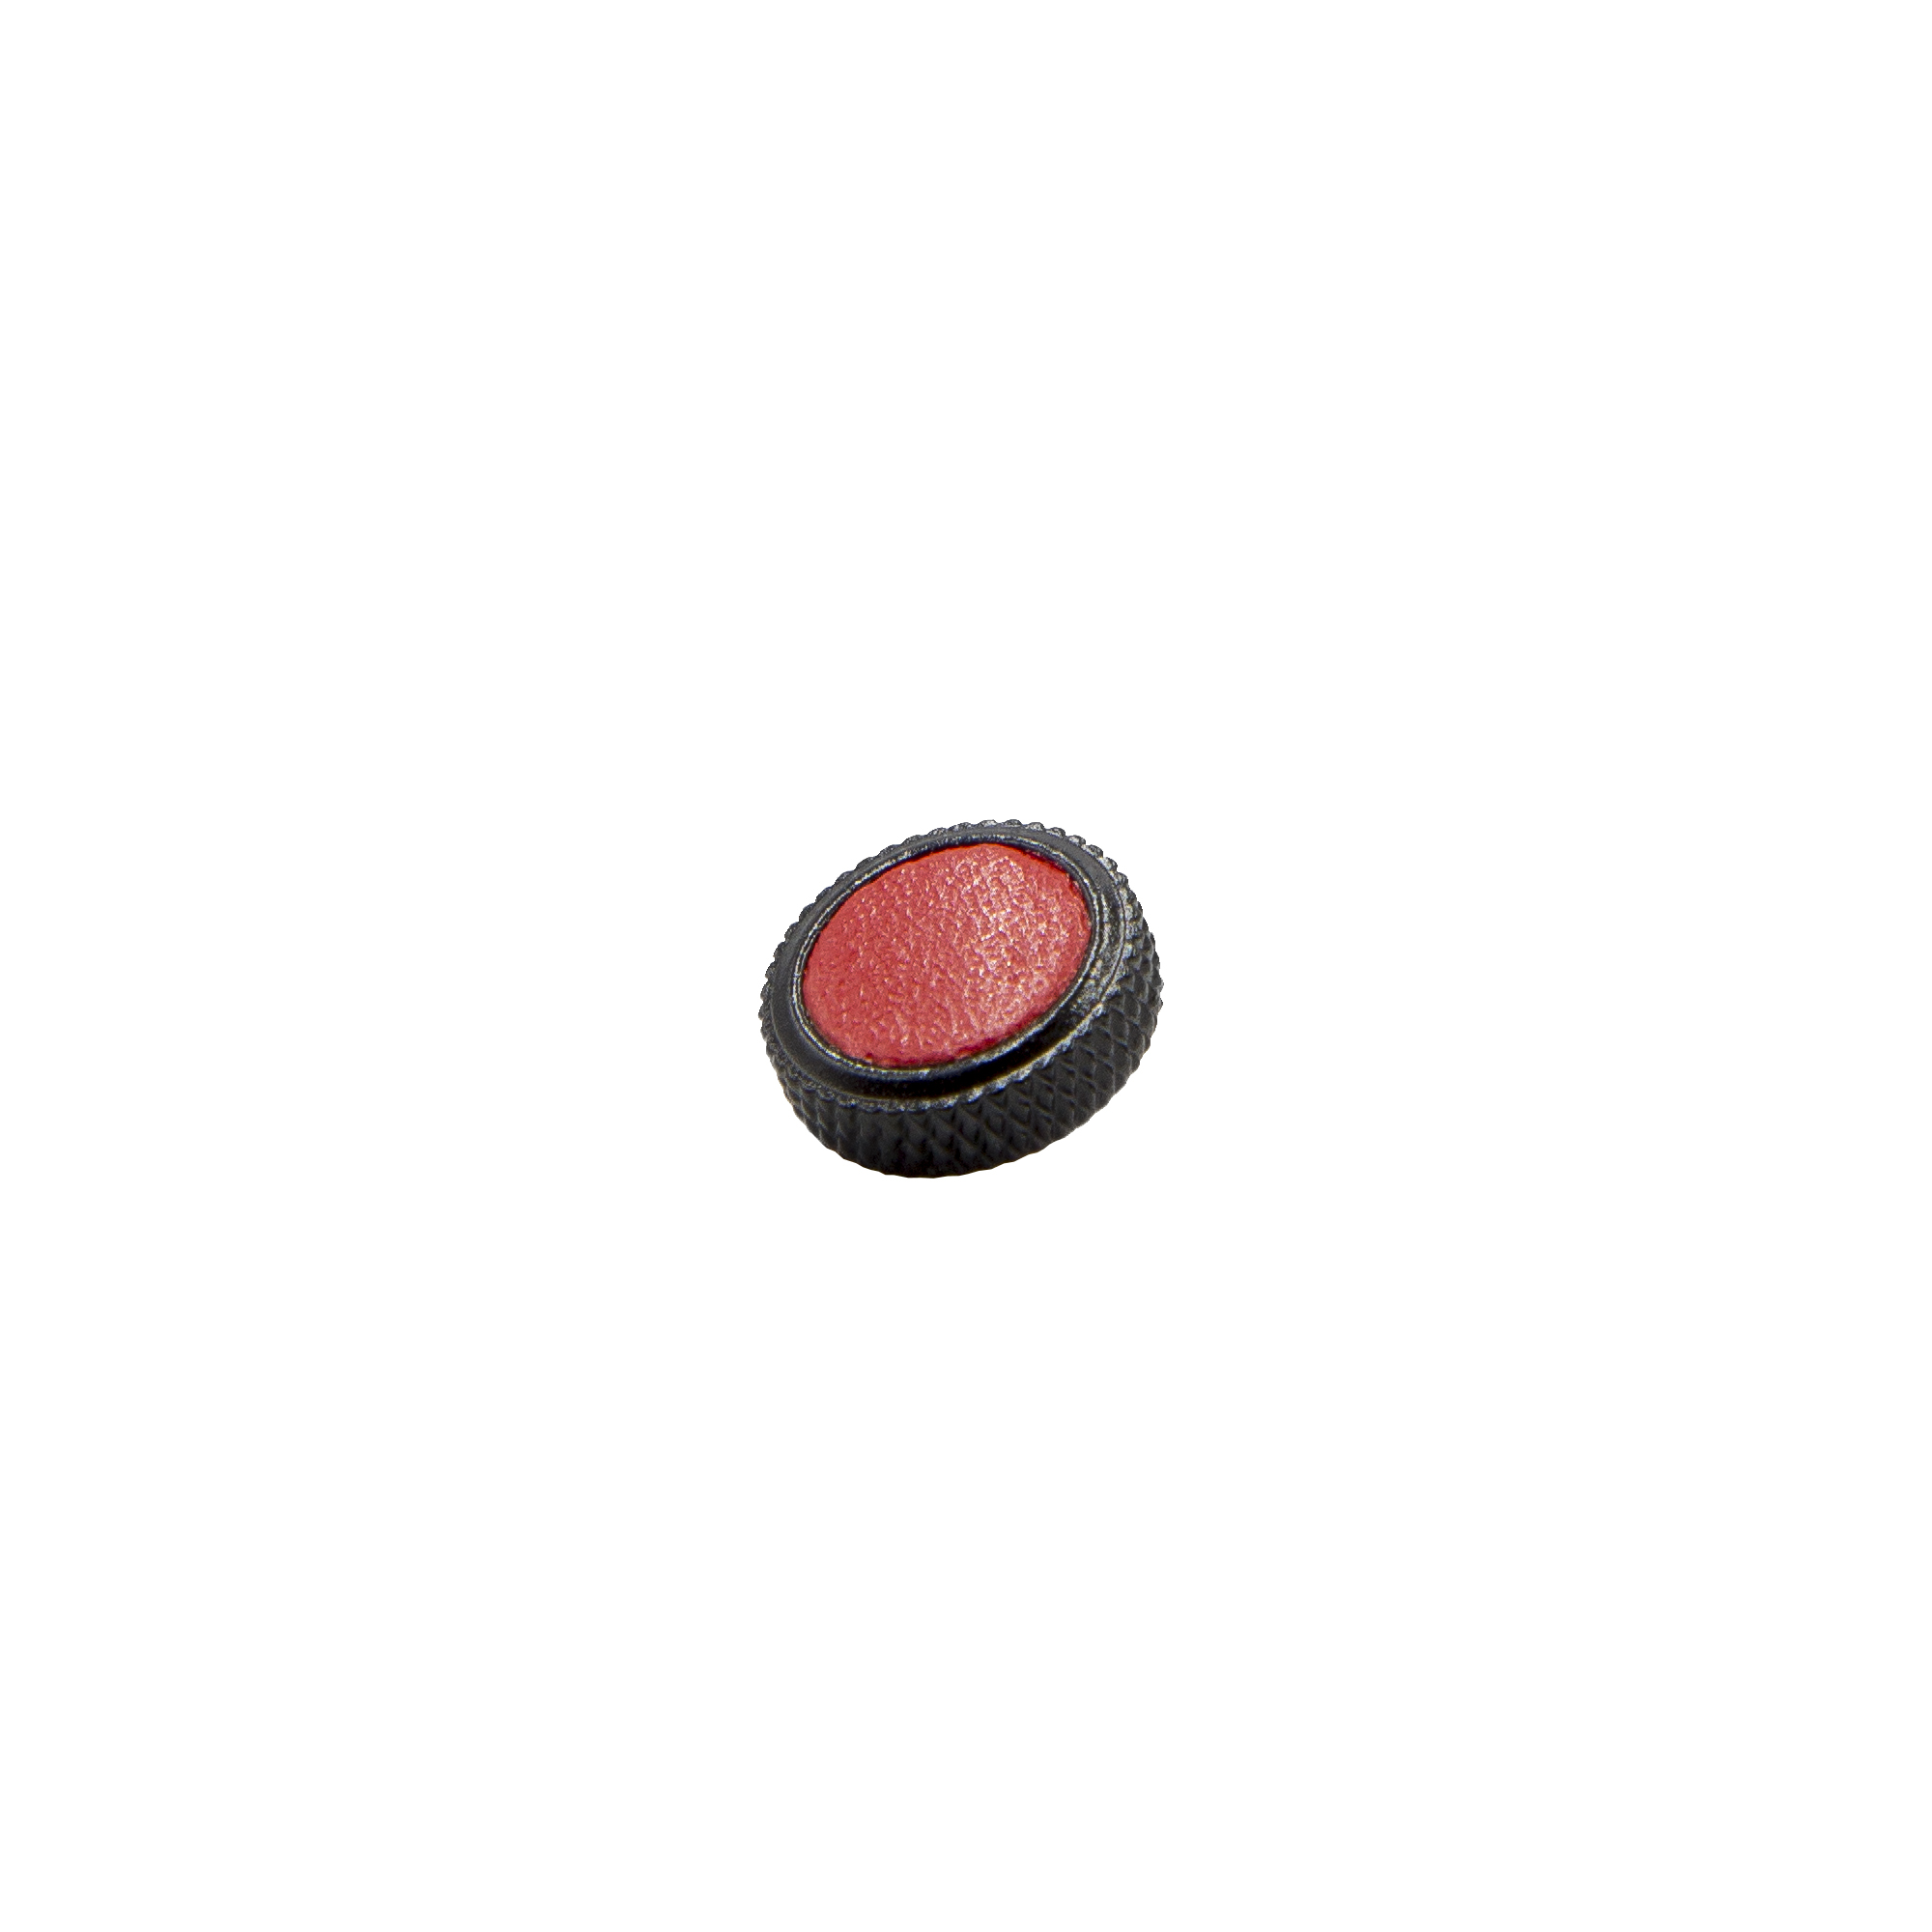 Promaster 2089 Deluxe Soft Shutter Button (Black/Red)